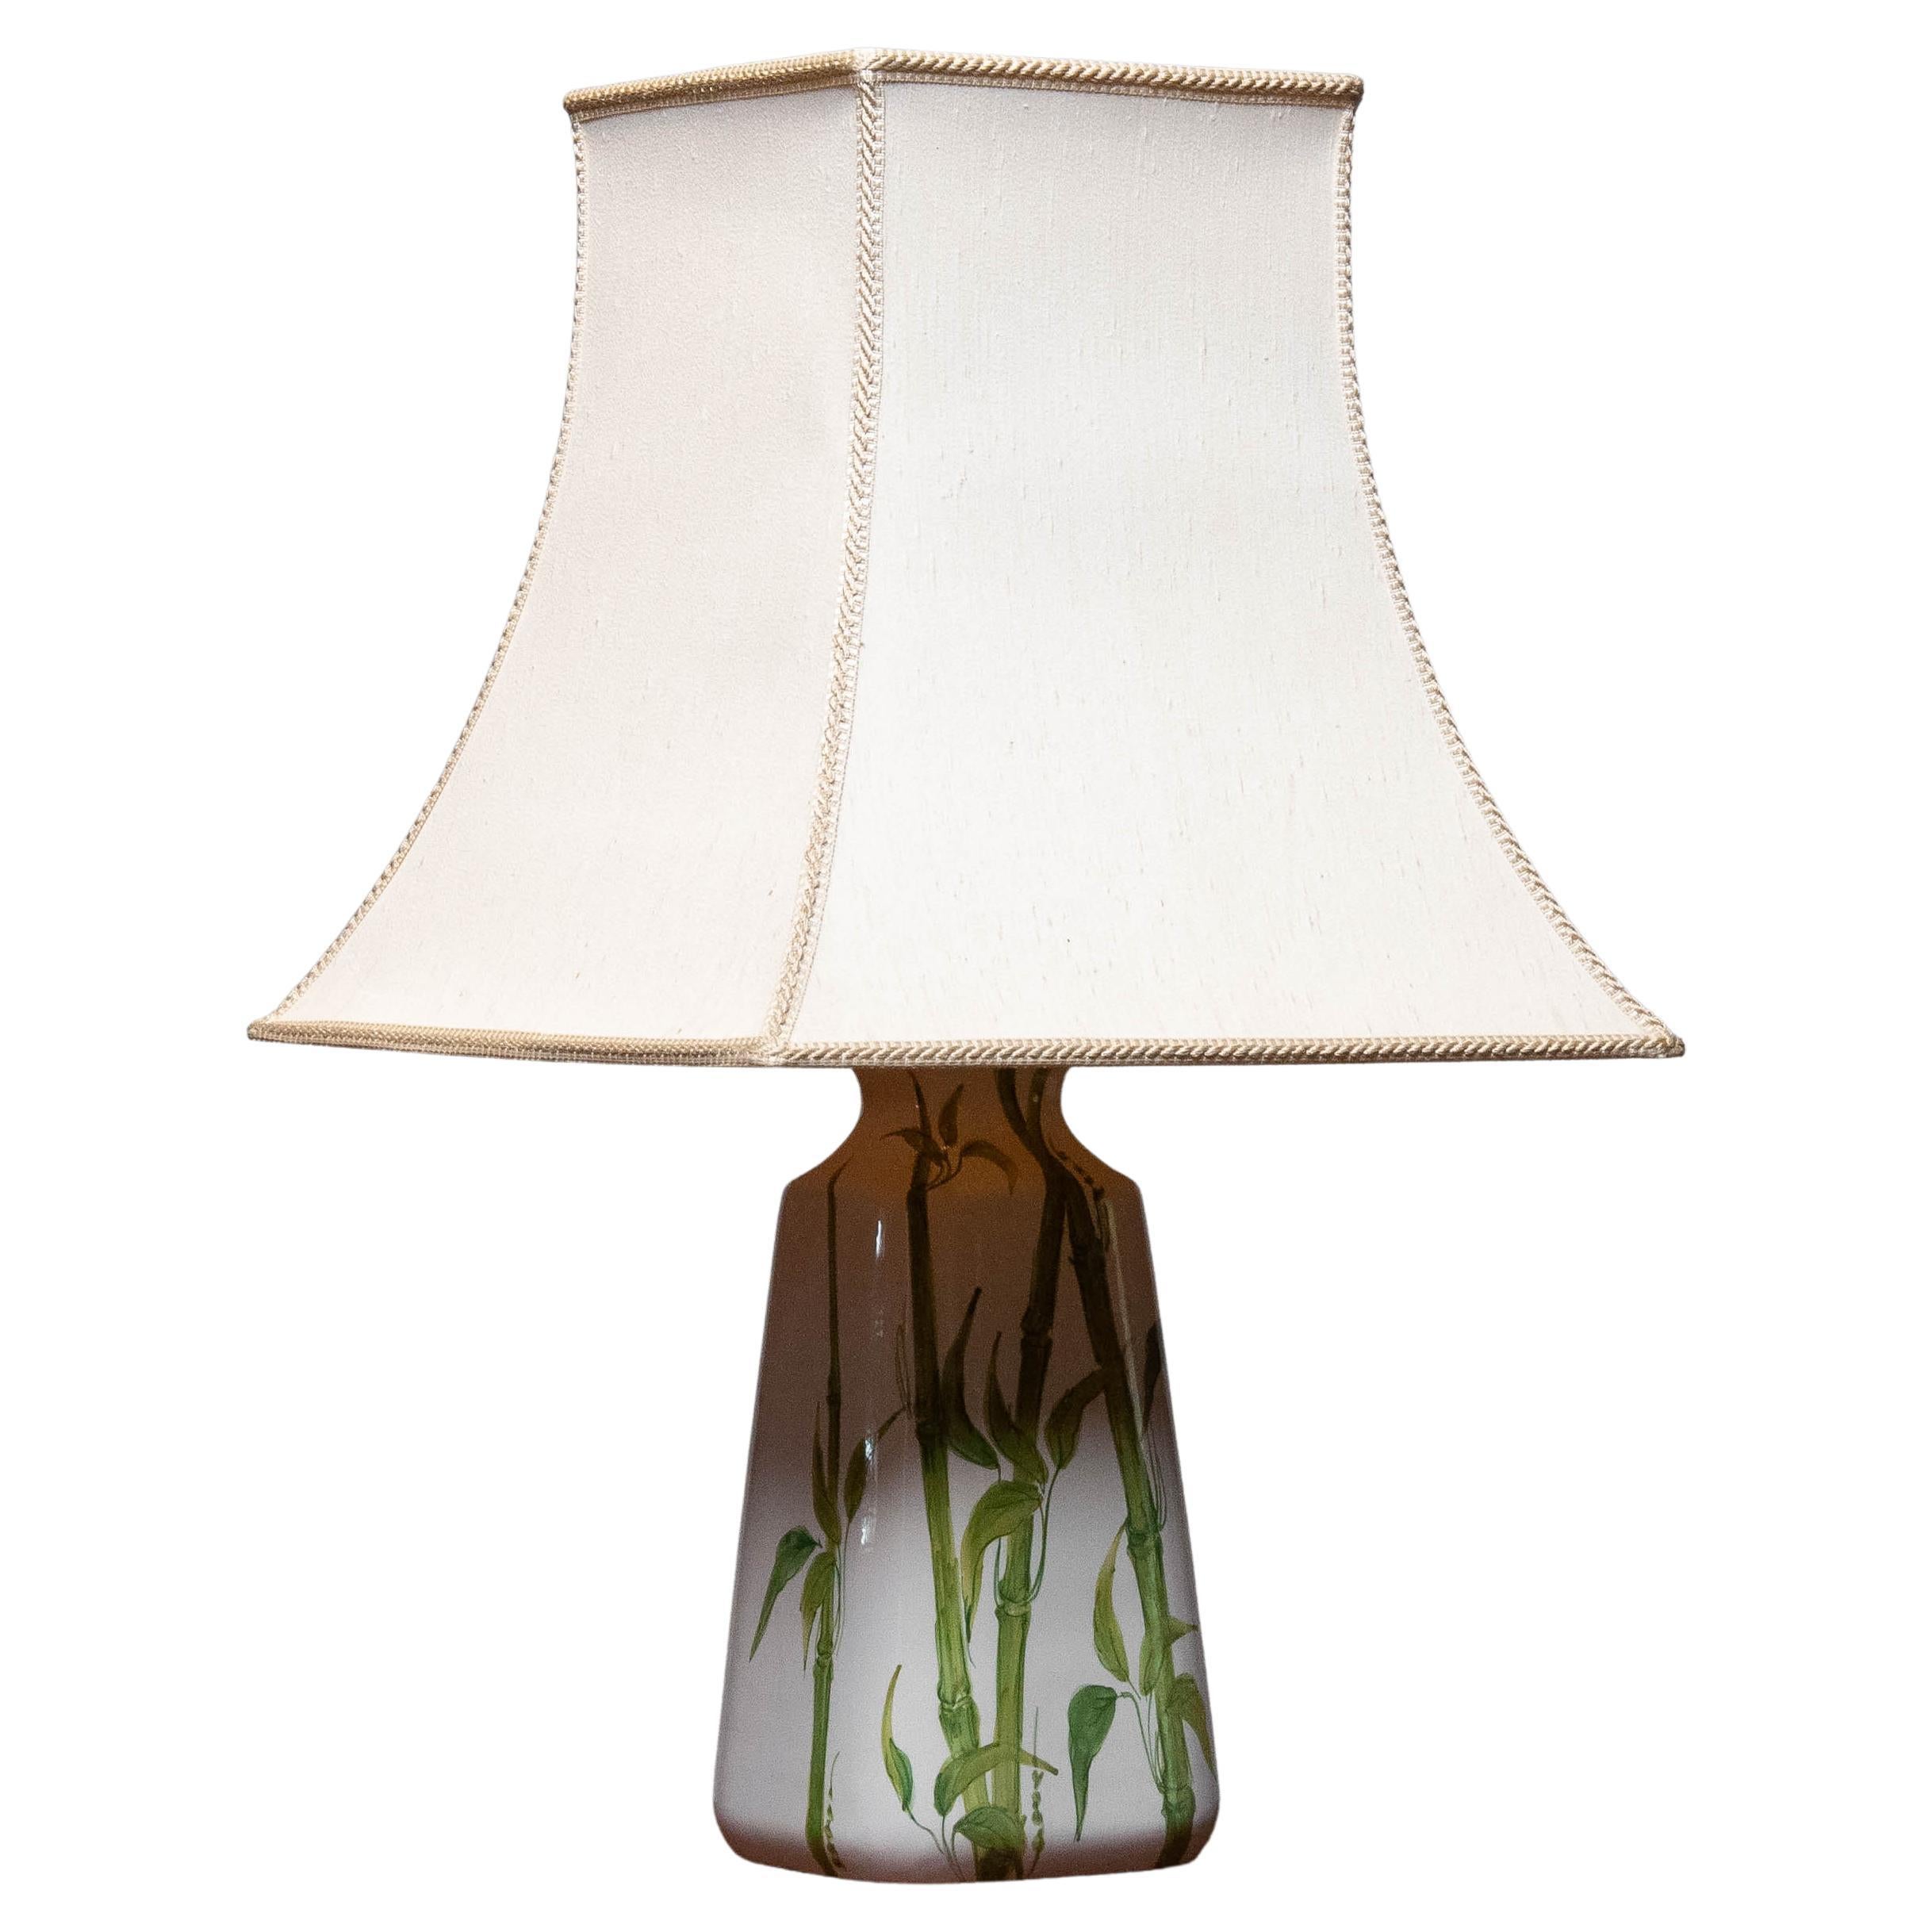 1960s Italian Hand Painted White Ceramic and Glazed Table Lamp with Bamboo Decor For Sale